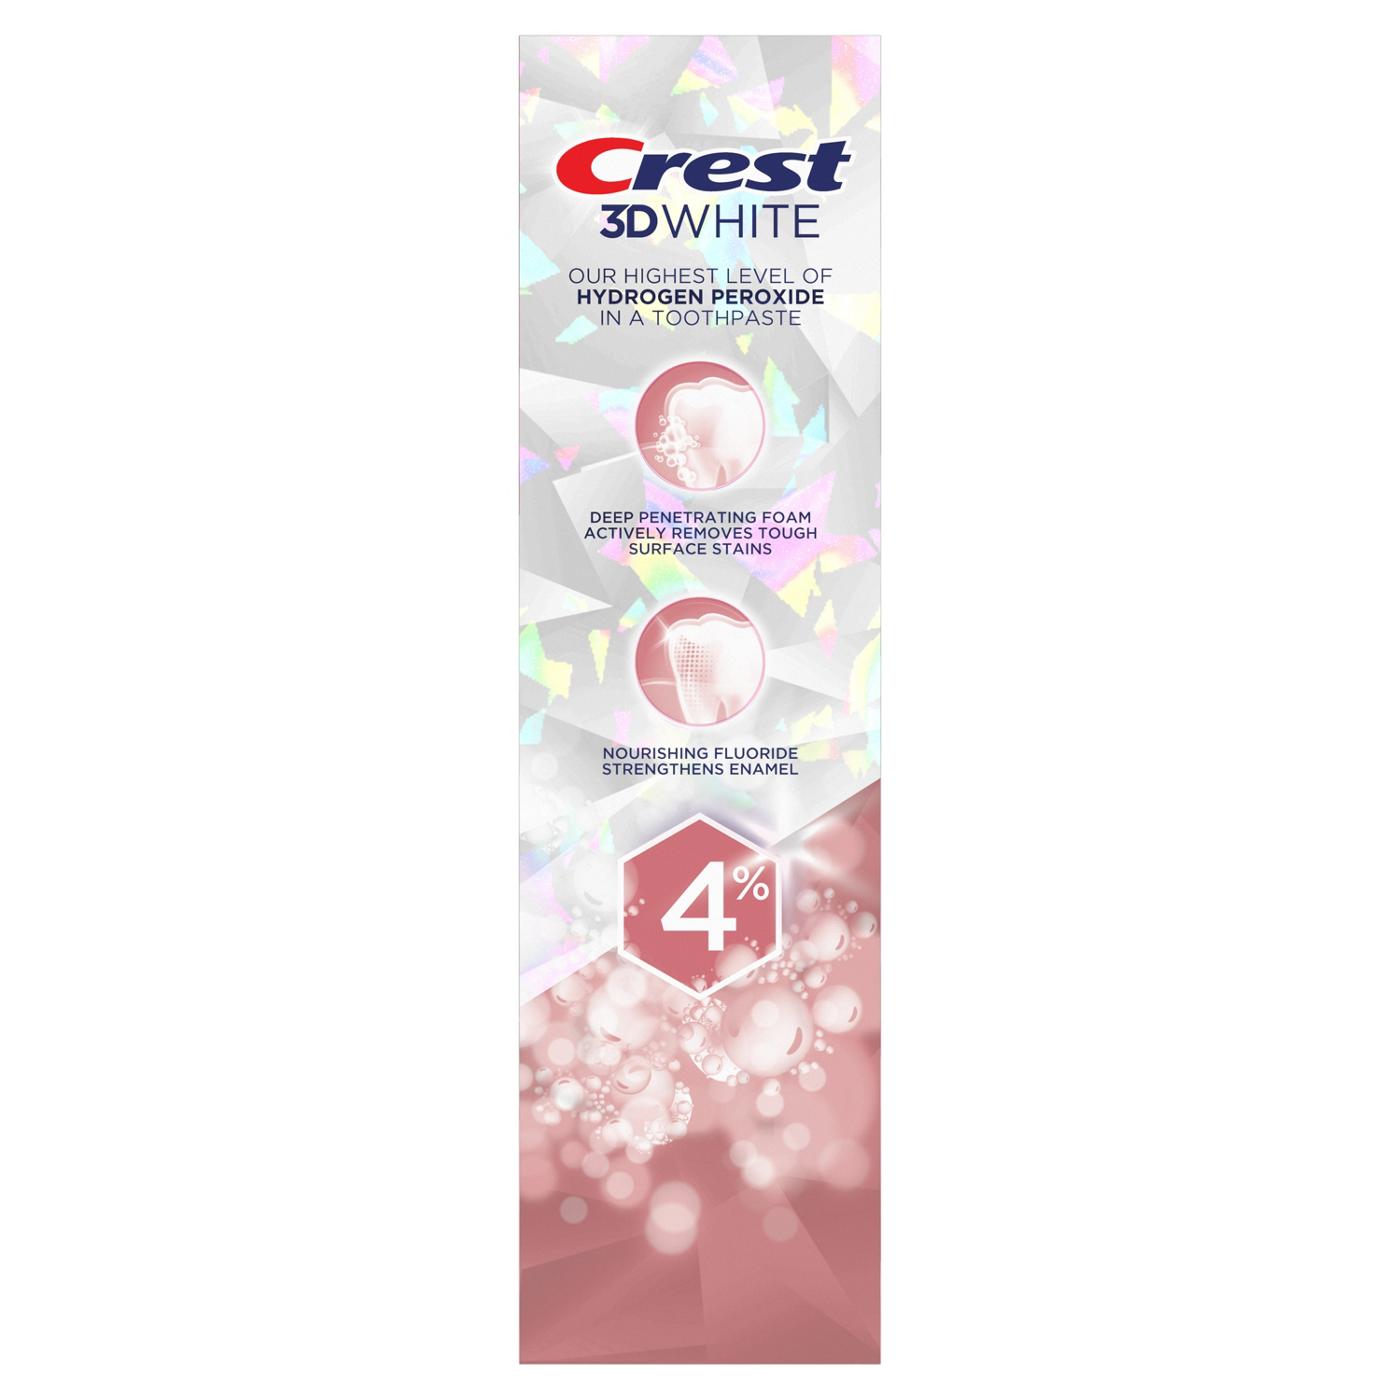 Crest 3D White Brilliance Hydrogen Peroxide Toothpaste - Fresh Mint; image 7 of 7